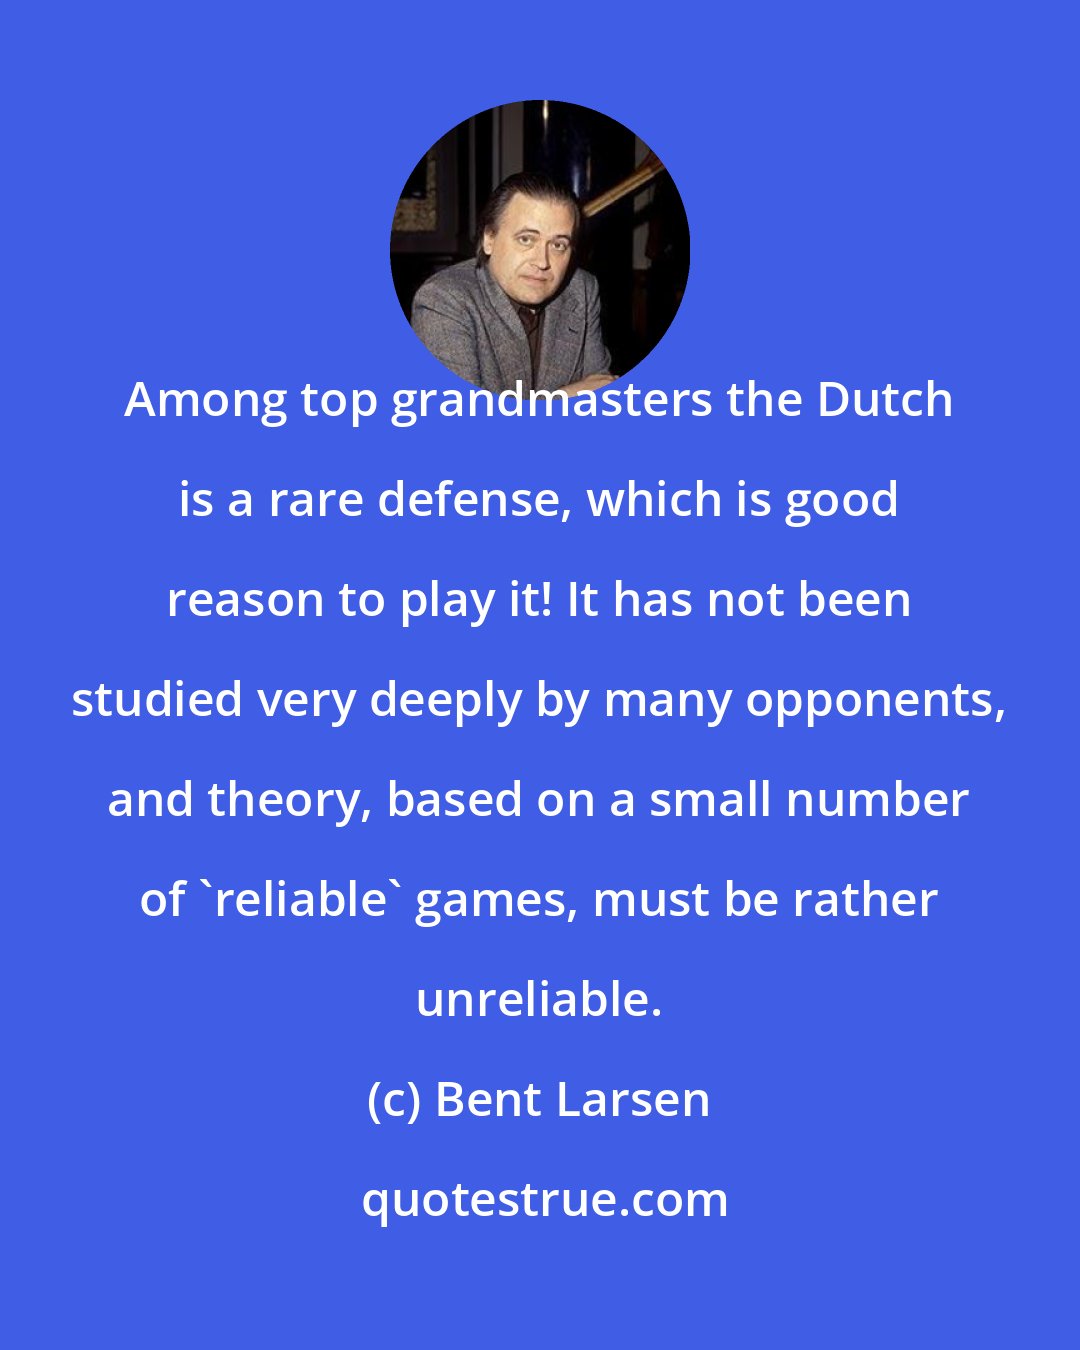 Bent Larsen: Among top grandmasters the Dutch is a rare defense, which is good reason to play it! It has not been studied very deeply by many opponents, and theory, based on a small number of 'reliable' games, must be rather unreliable.